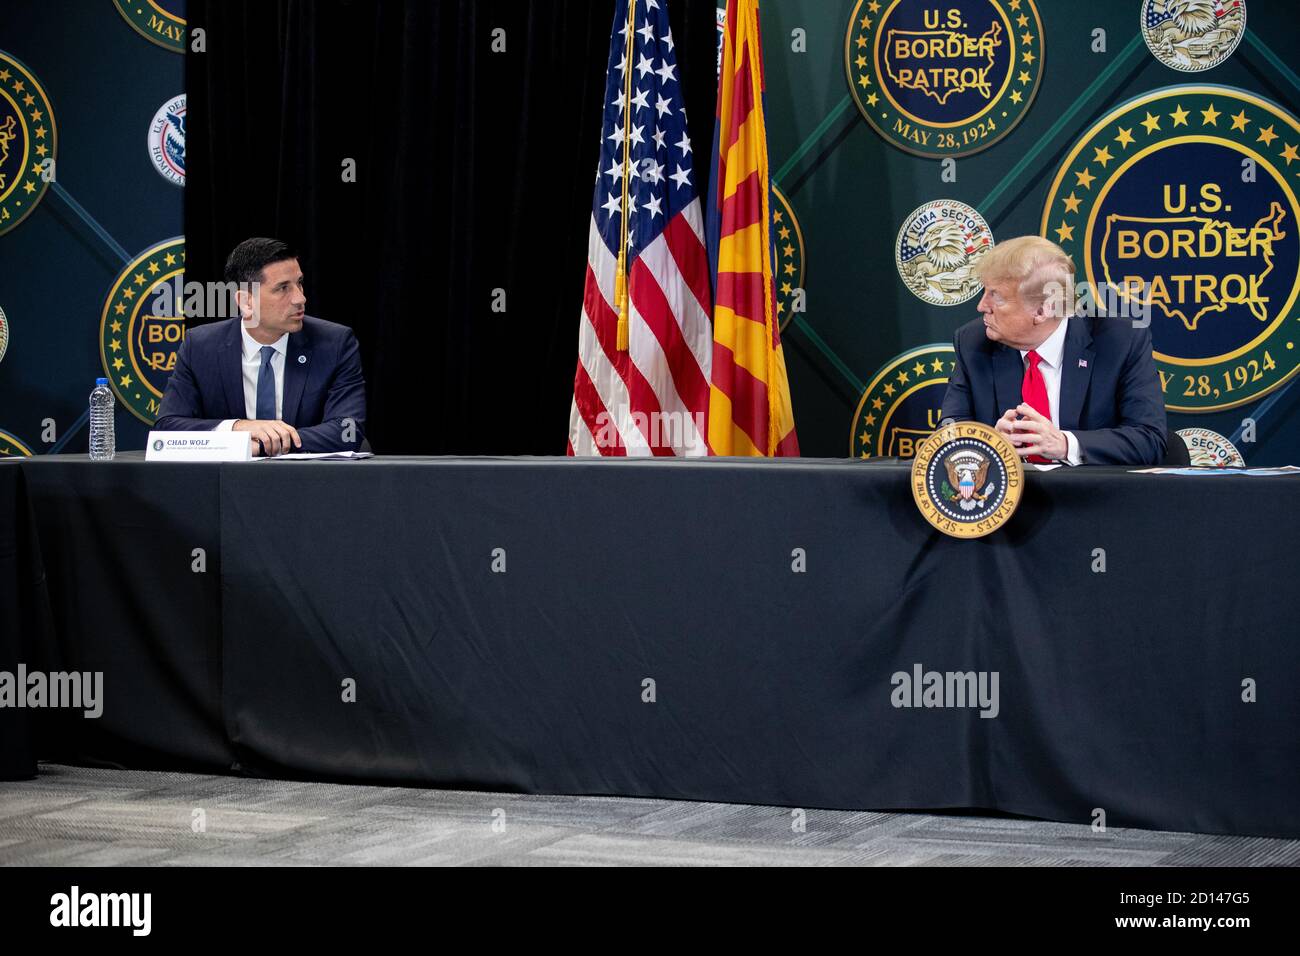 President Donald Trump, along with Acting Secretary Chad Wolf and Acting Commissioner Mark Morgan, visited the border wall in Yuma, Arizona on June 23, 2020. The visit marked the completion of 200 miles of new border wall constructed along the southwest border. Stock Photo